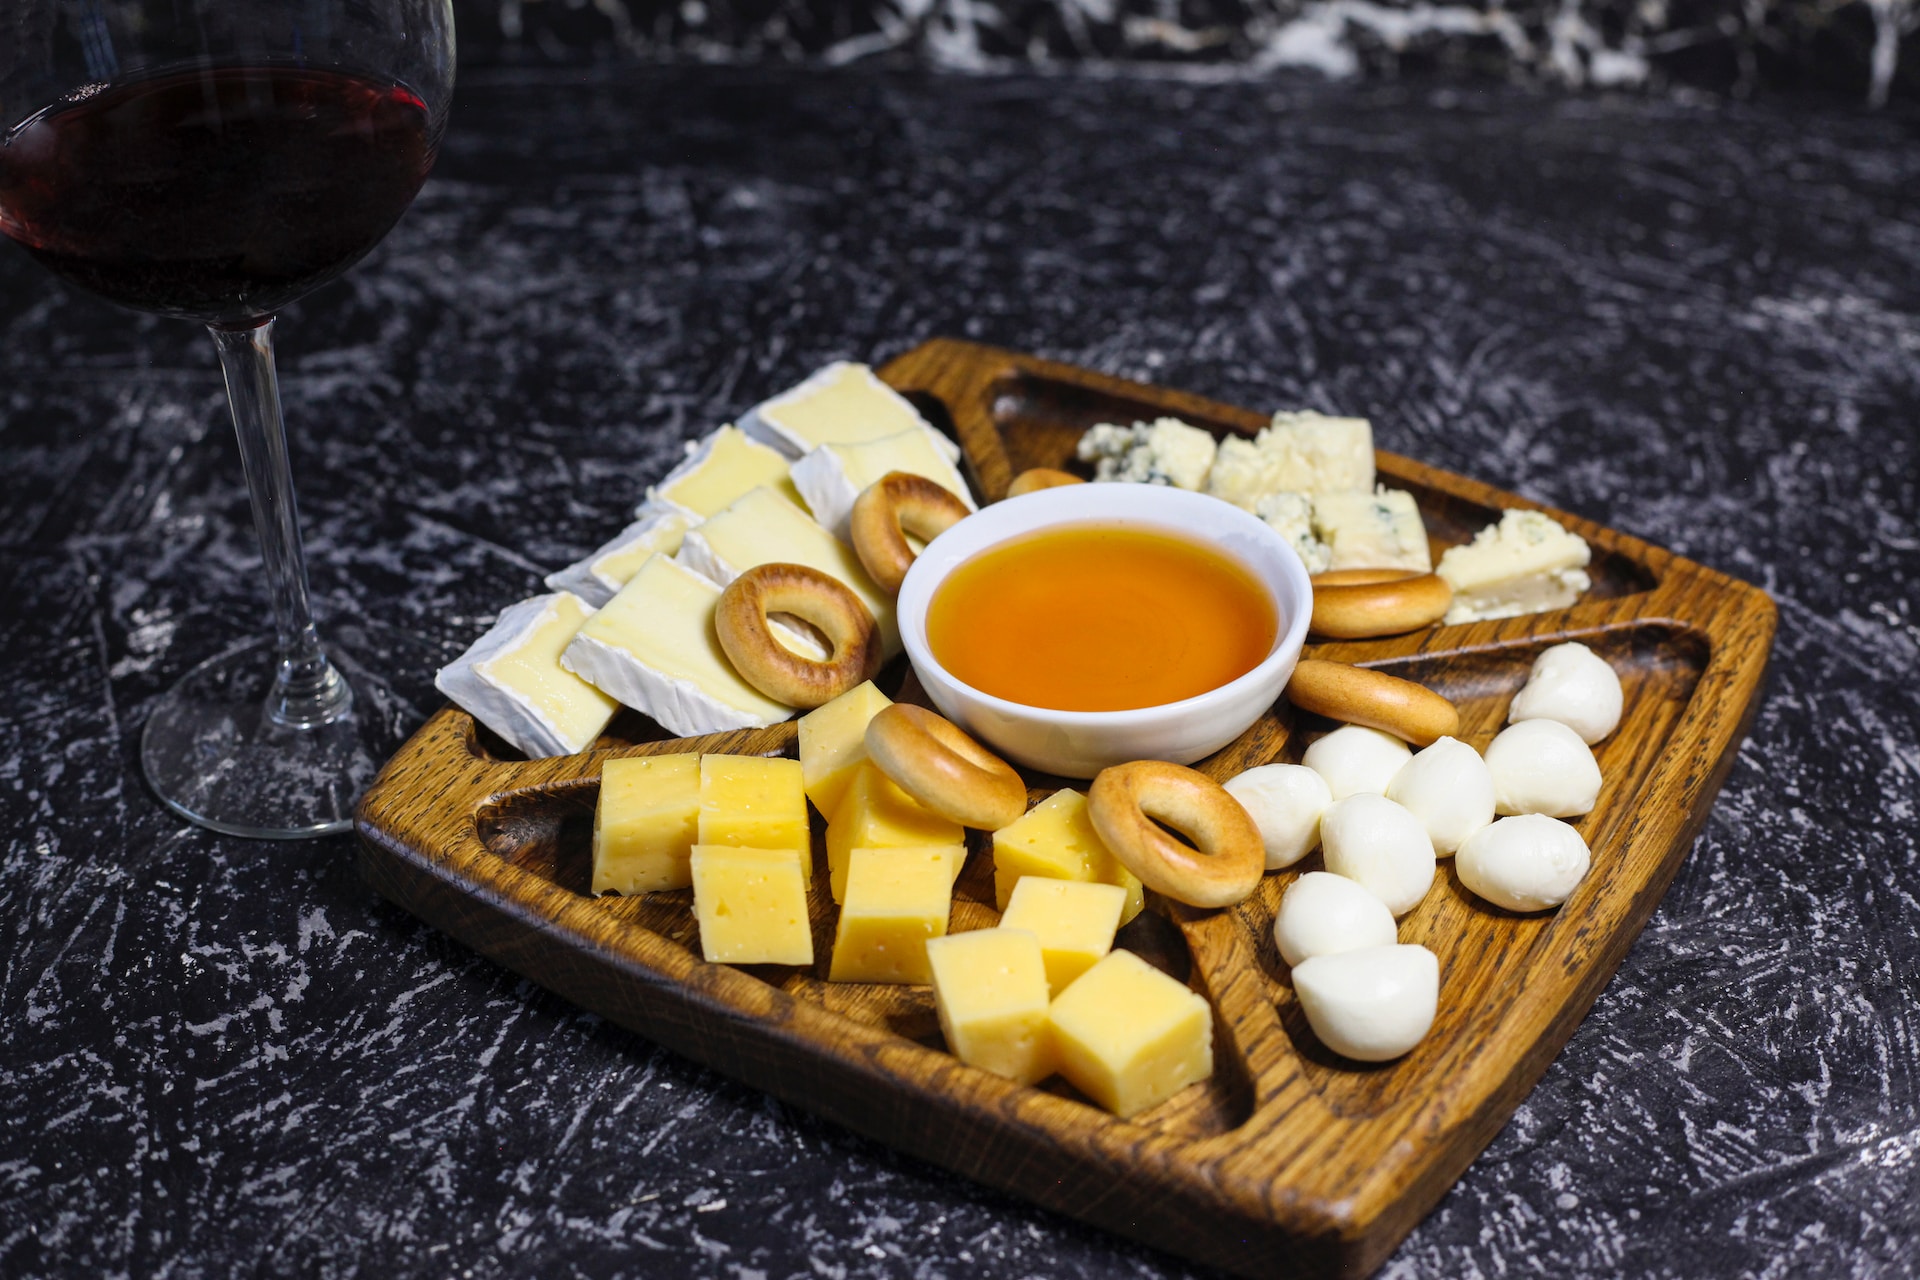 food images & pictures, cheese, food presentation, plate, dish, backgrounds